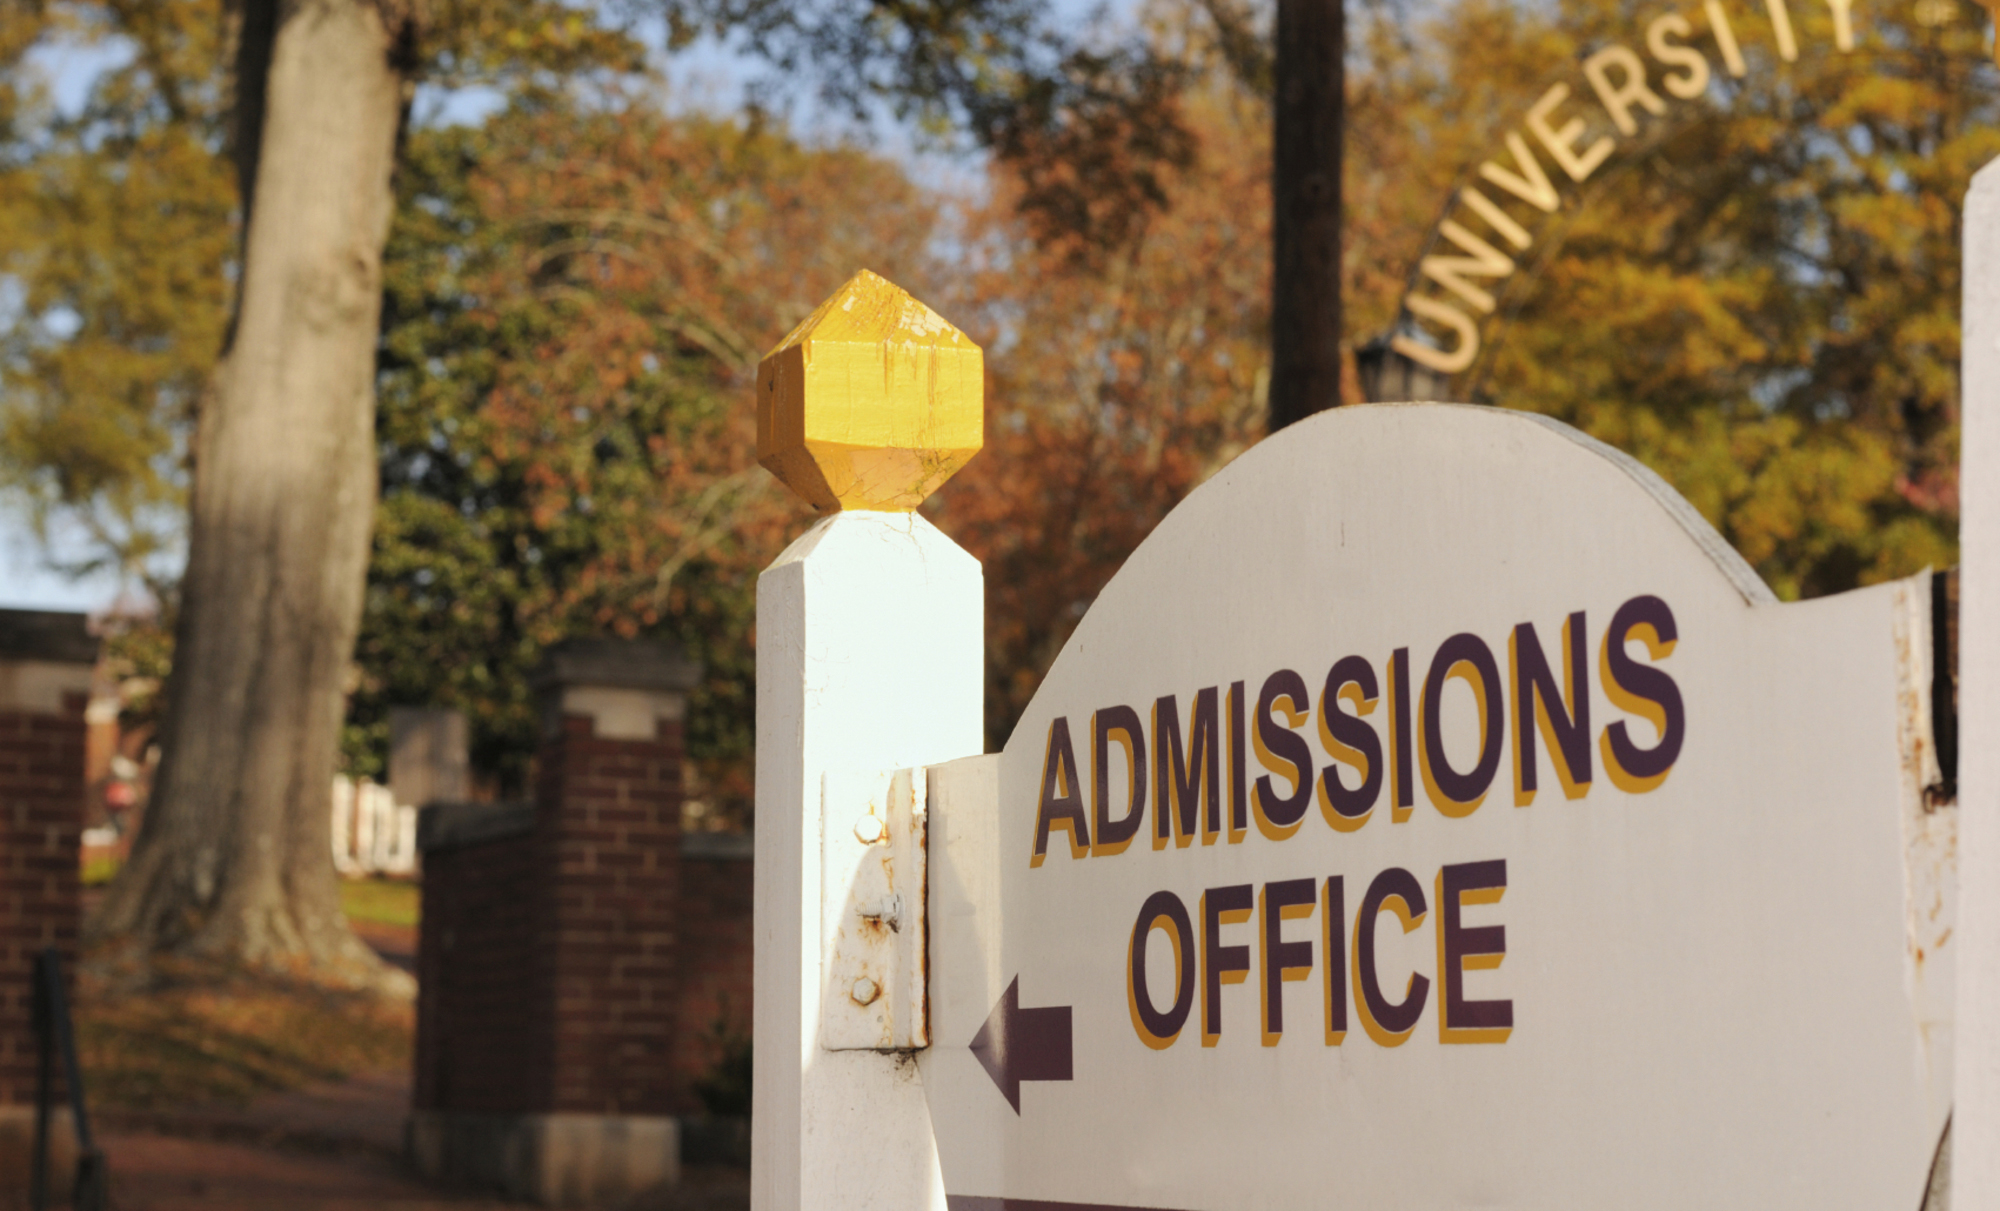 Admissions Office